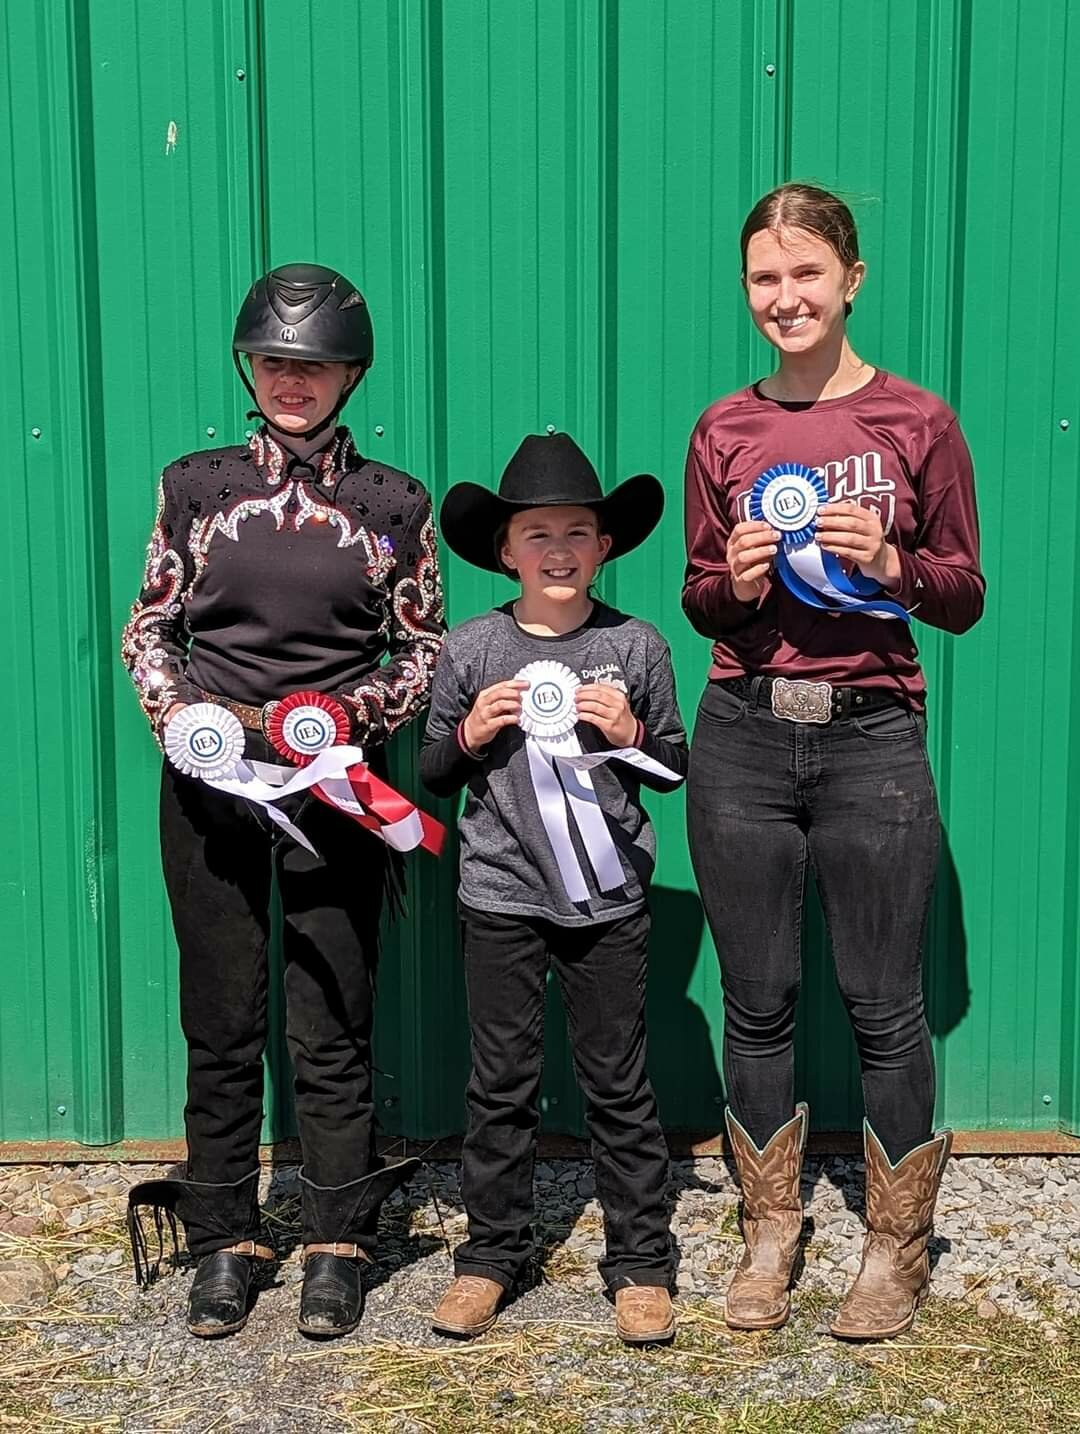 Diehl Me In's Western riders competed in the regional finals, and two qualified for the national show in Fort Worth, TX. Pictured are Haley Hahn, left; Gretchen Petry; and Sandra Hanofee.